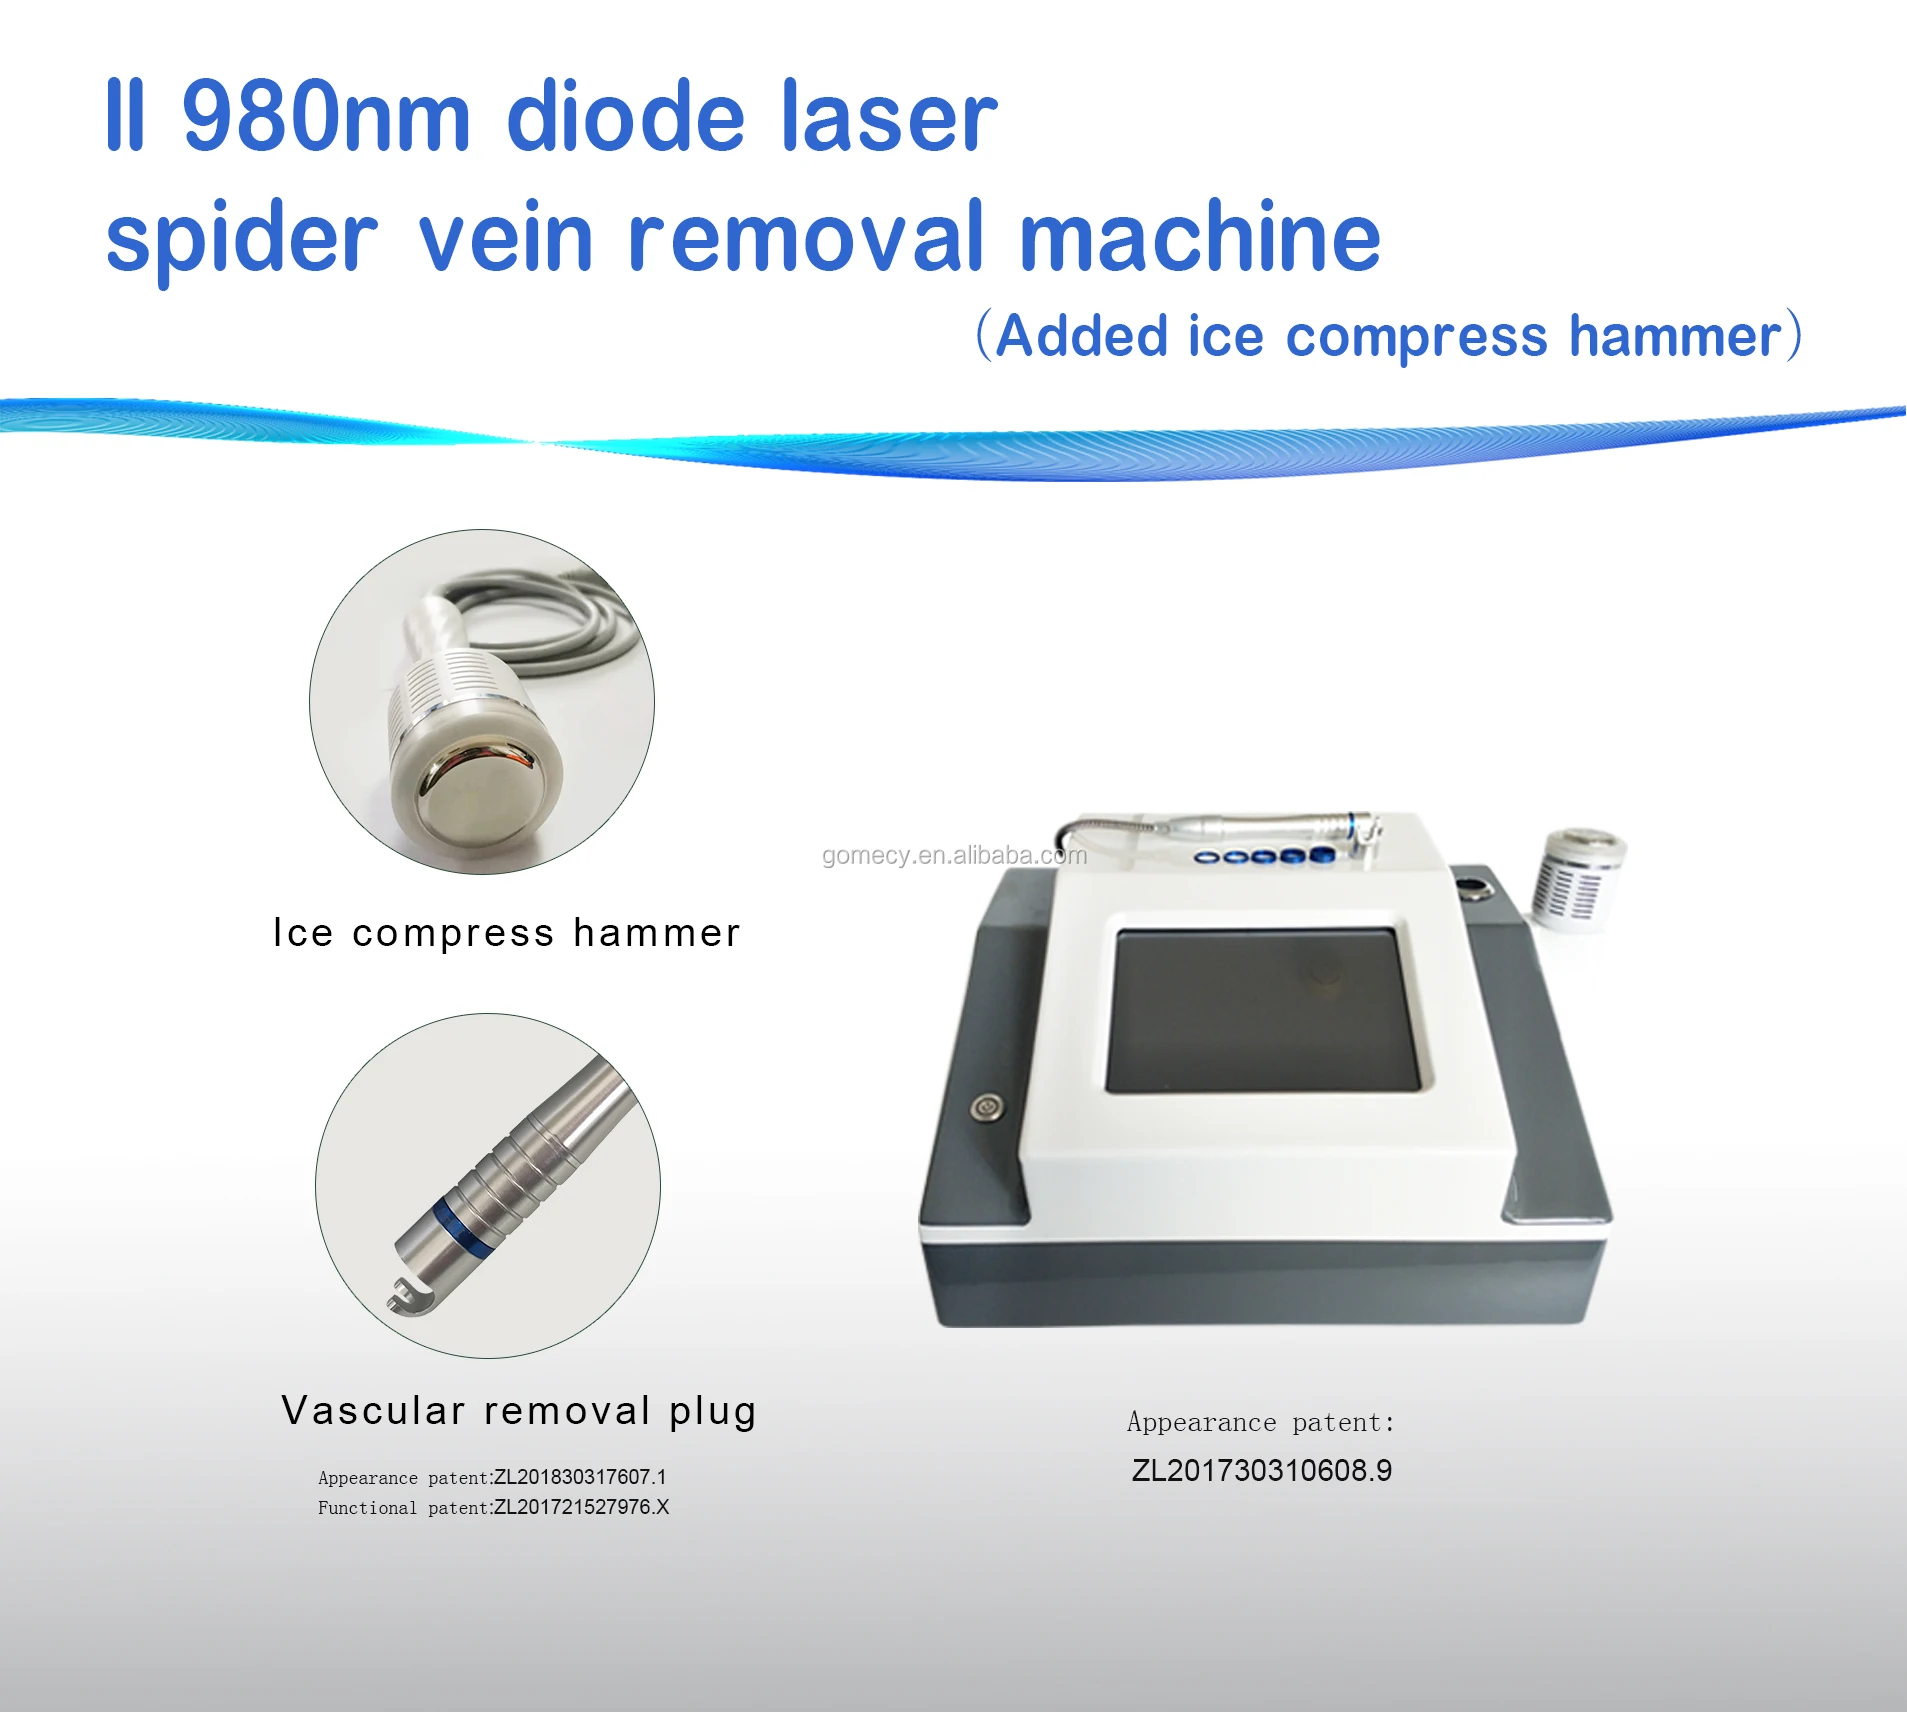 GOMECY 980nm wavelength laserbeam diode laser nail fungus vein removal beauty device cold compress hammer